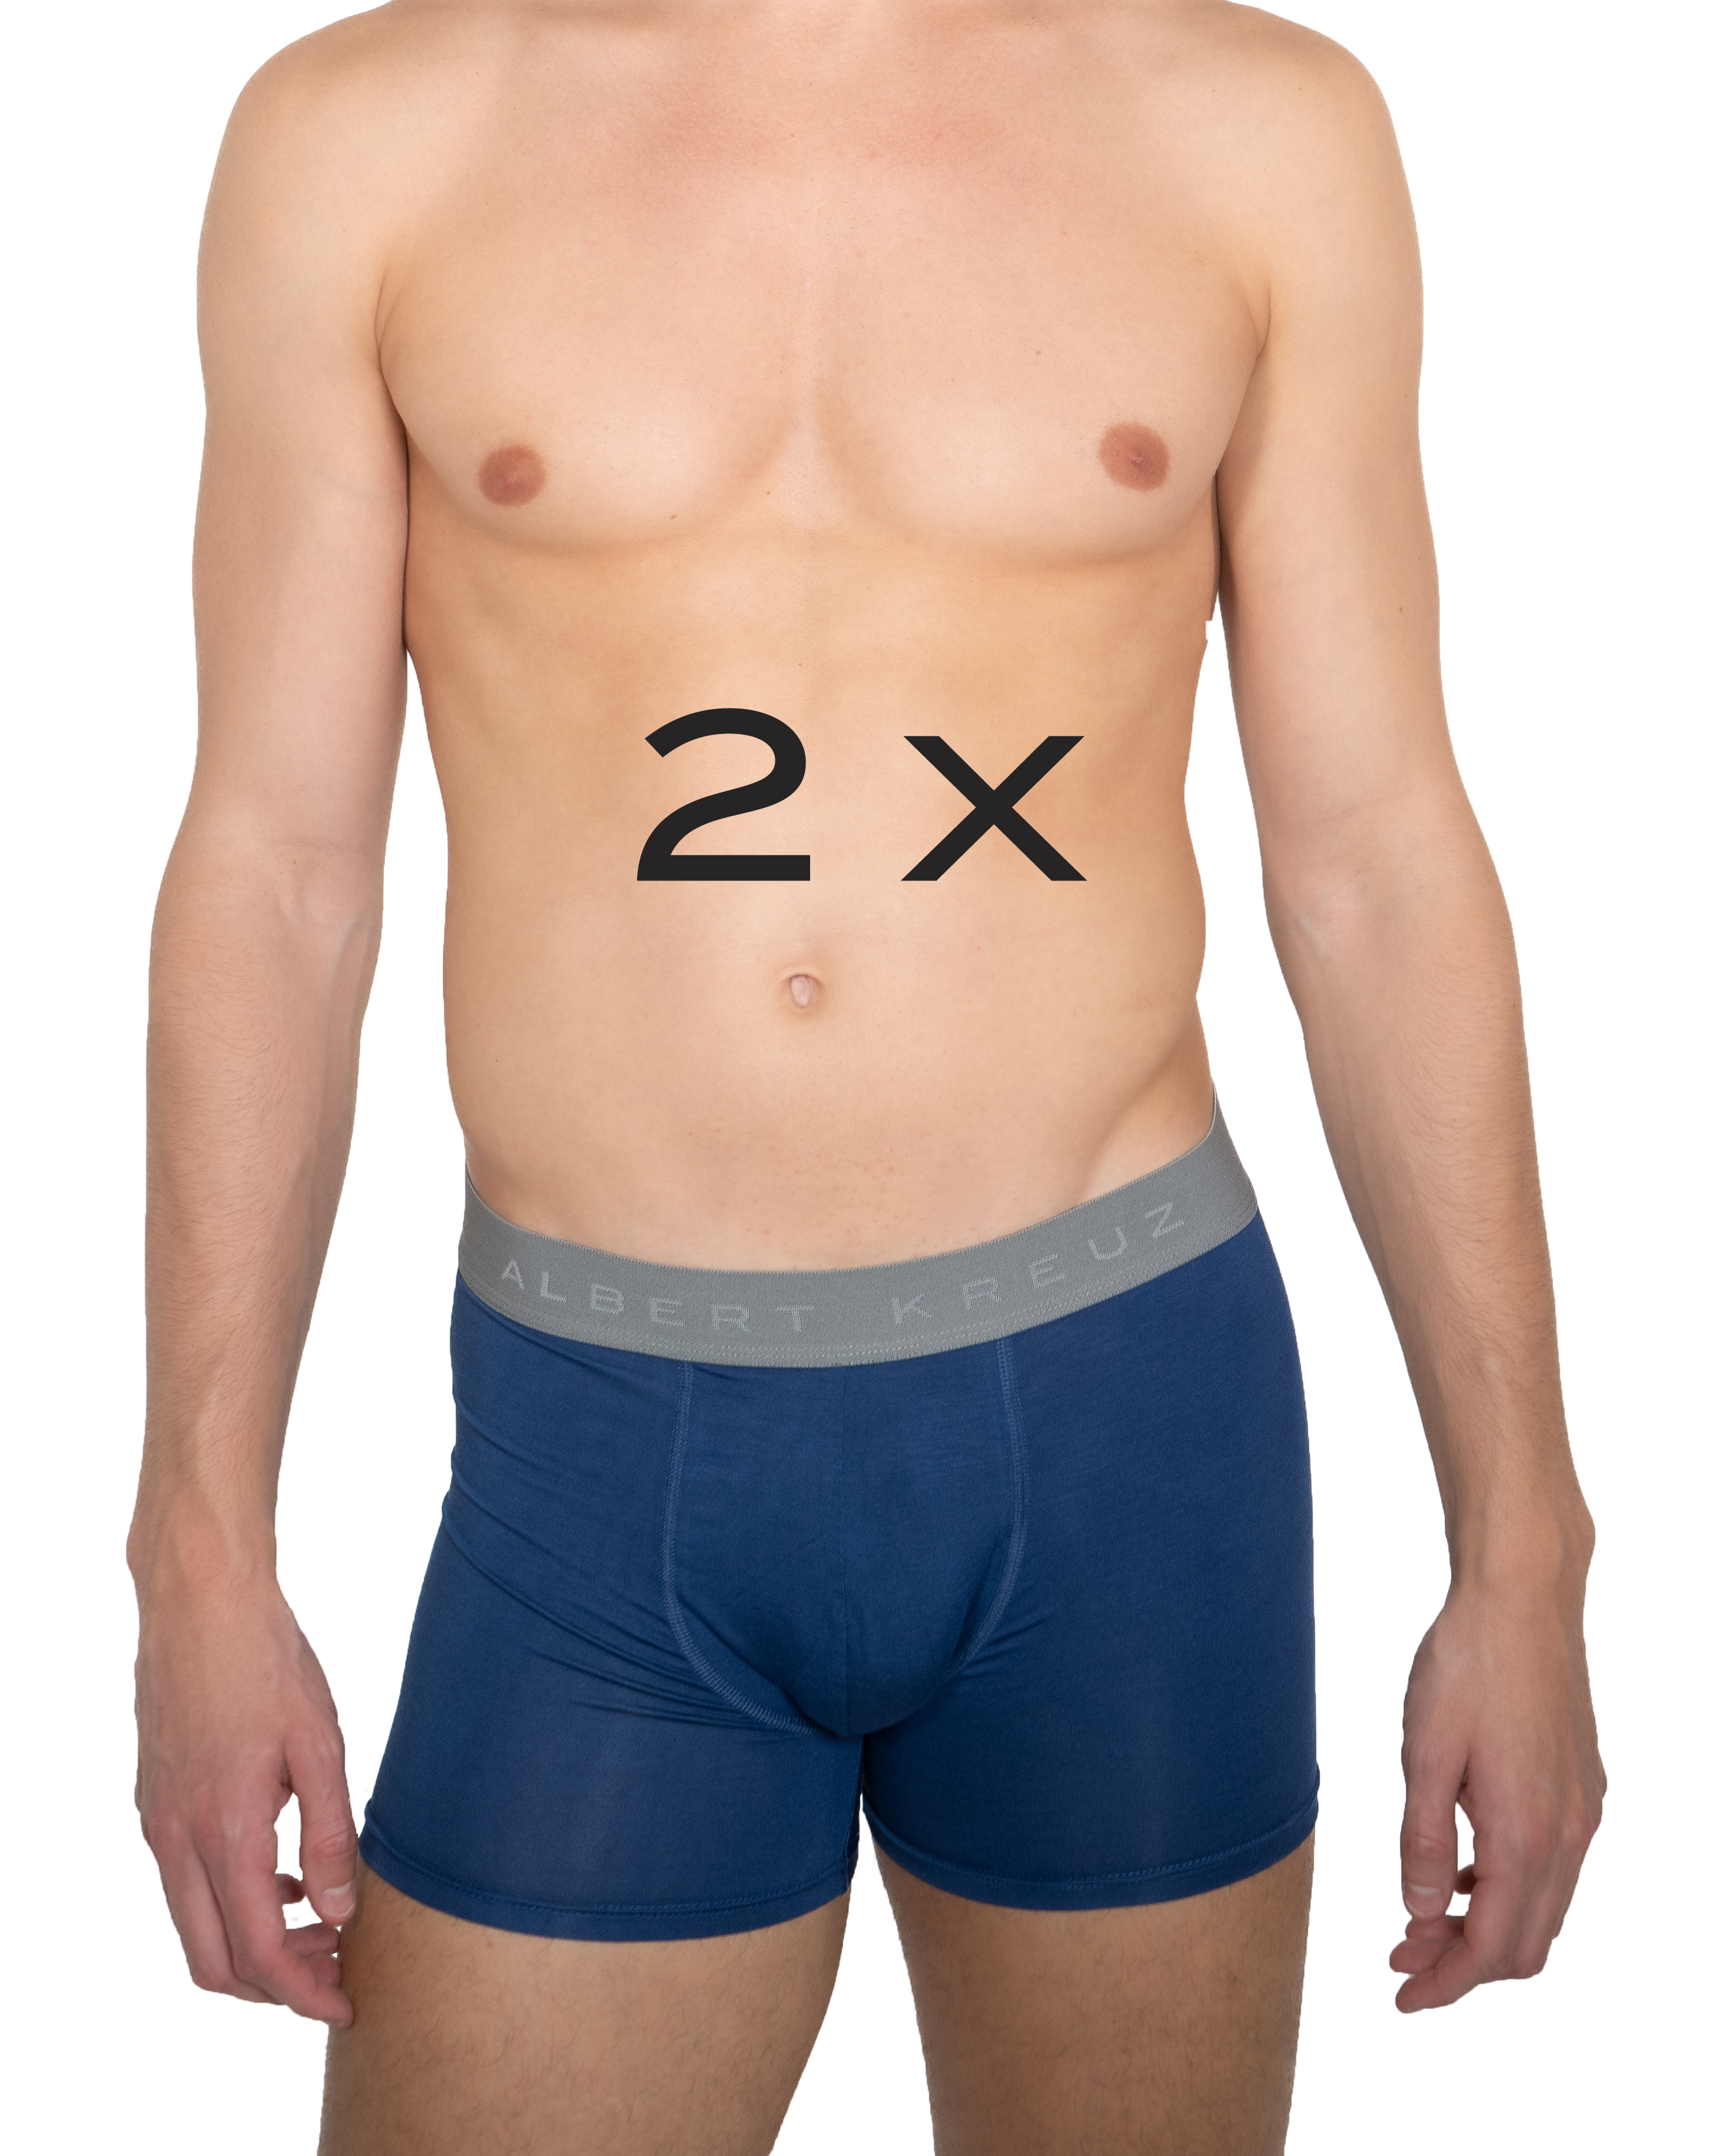 Men Boxers. Breathable and Most Comfortable Styles-Germany